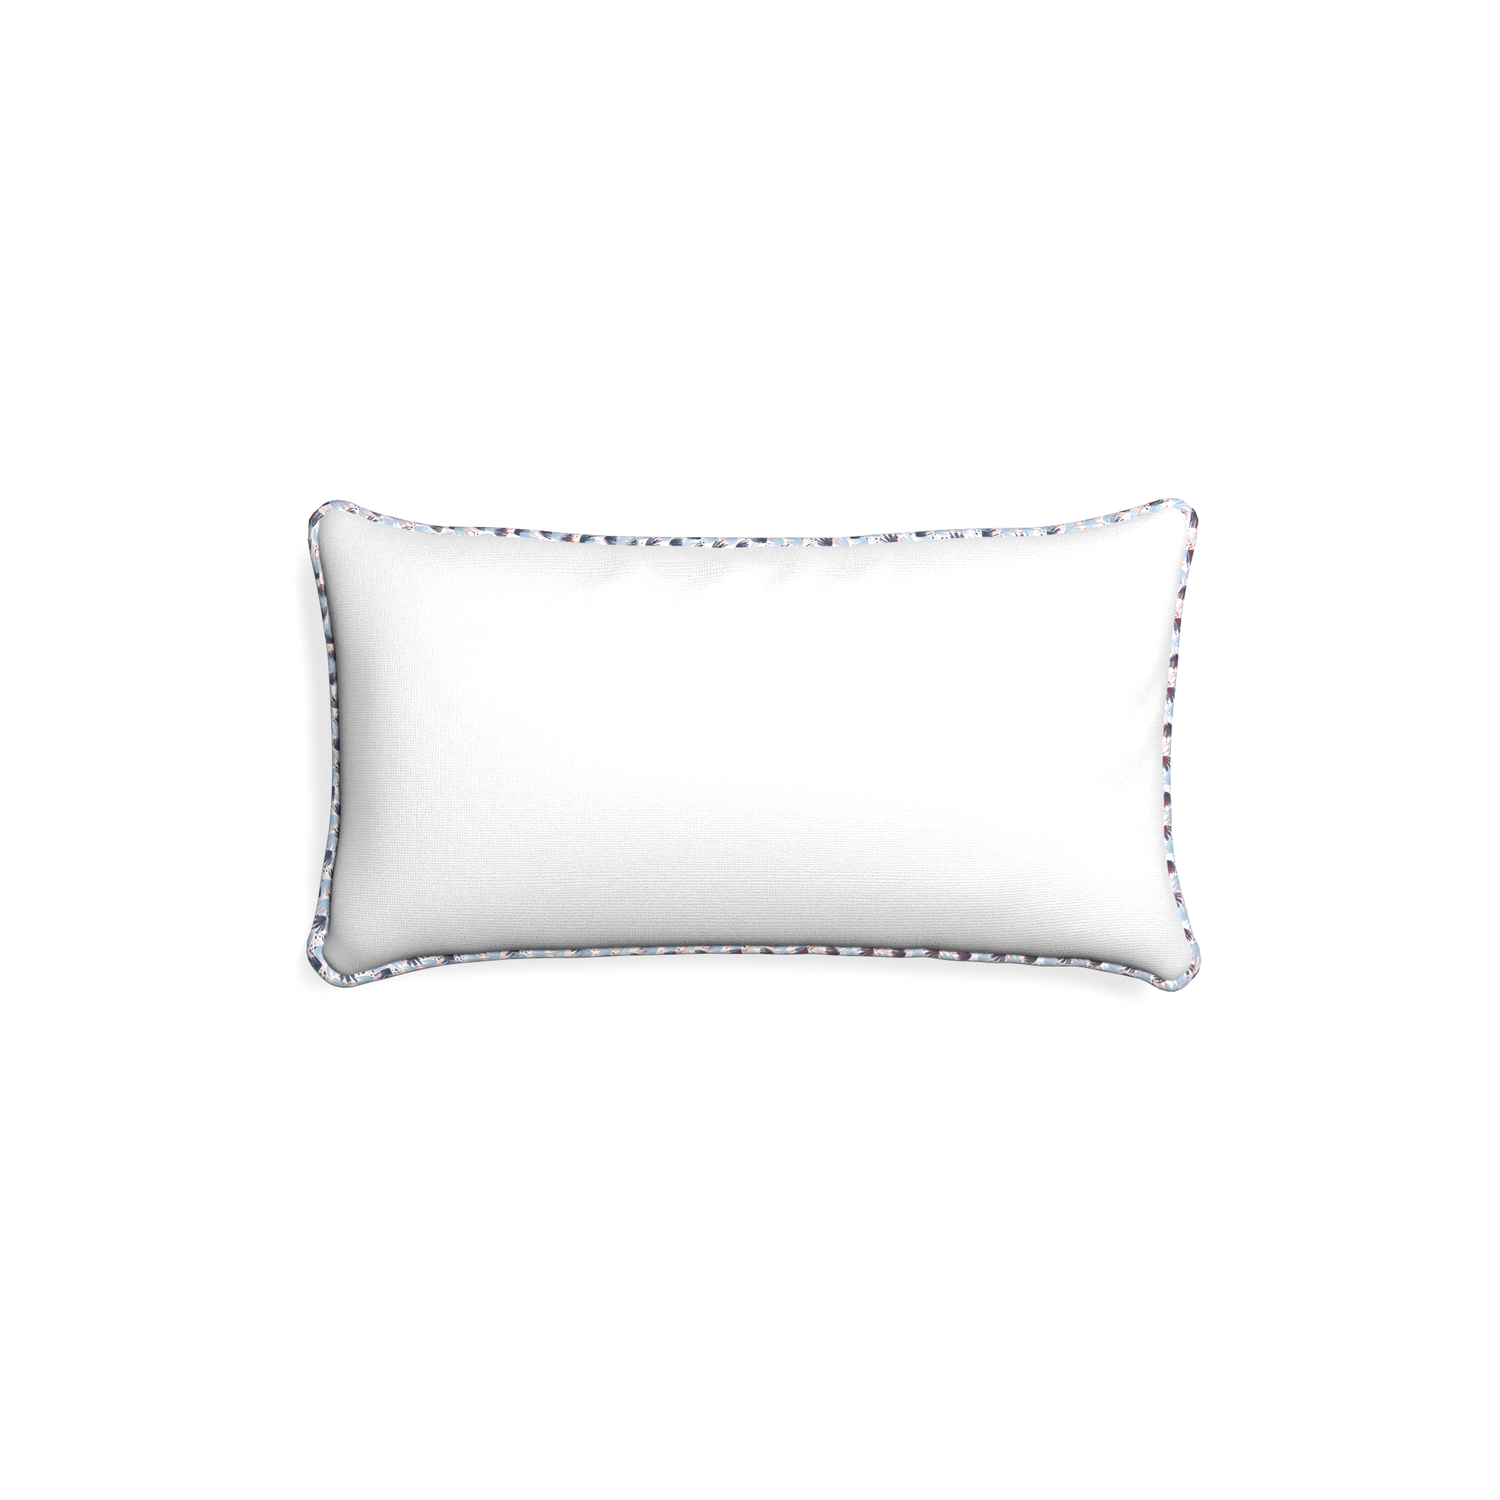 Petite-lumbar snow custom white cottonpillow with e piping on white background